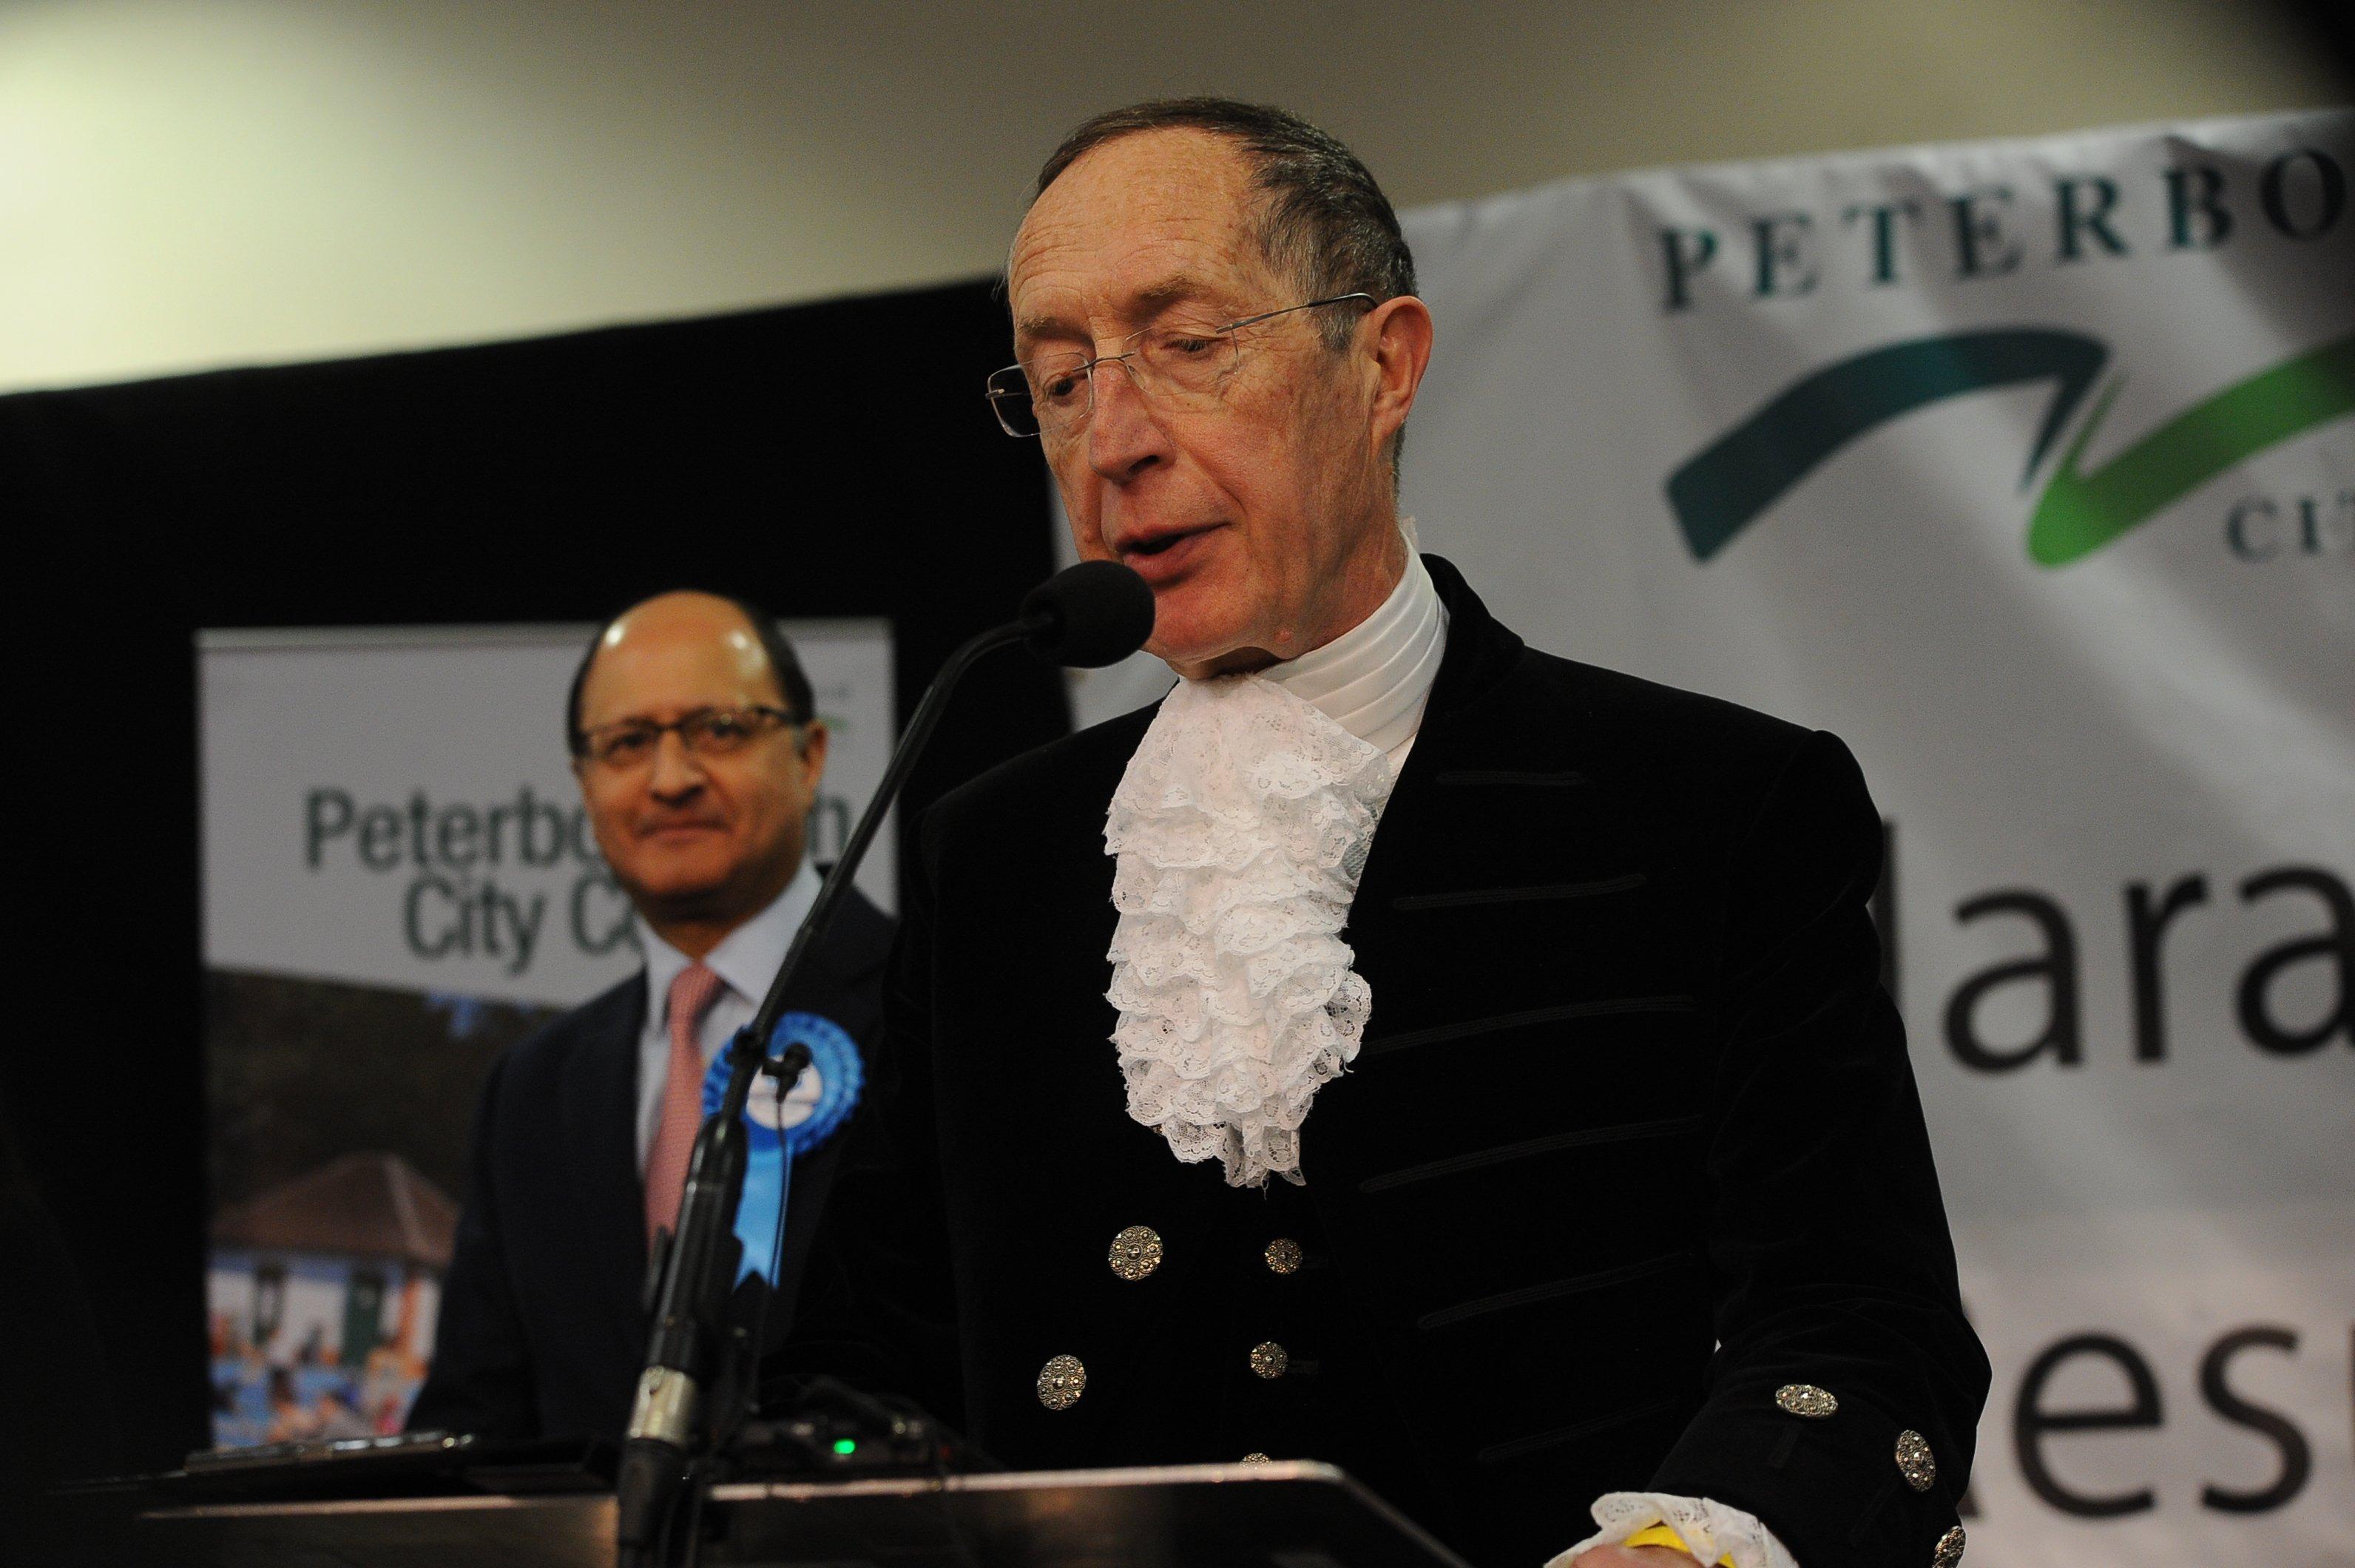 High Sheriff of Cambridgeshire Neil McKittrick announcing the result for North West Cambridgeshire